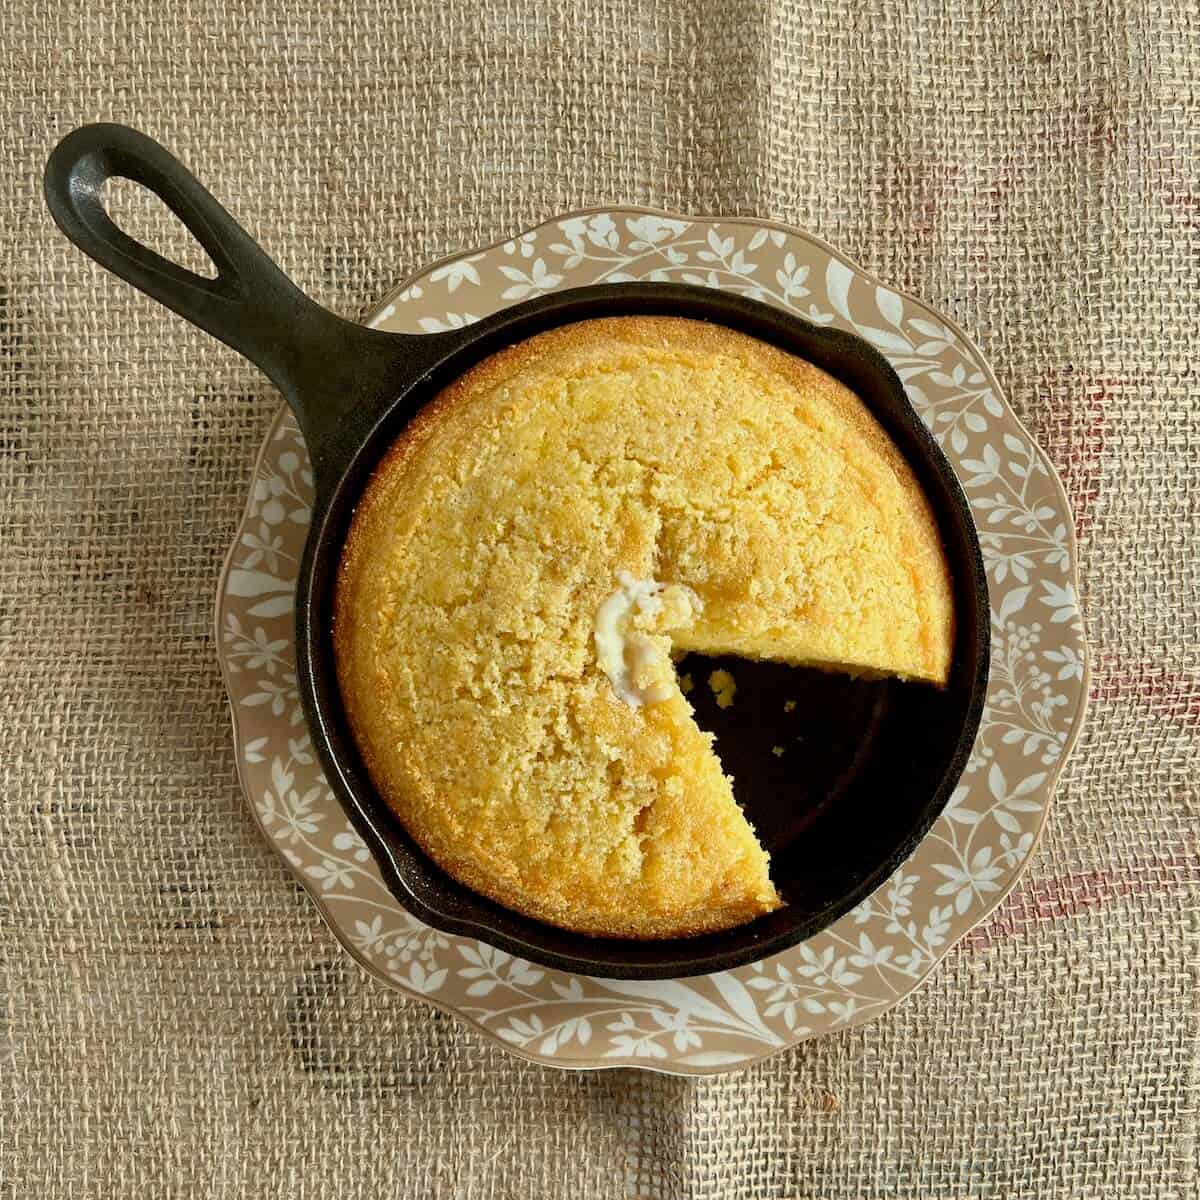 Cut cornbread topped with pat of butter in a cast iron skillet on a brown edged plate from overhead.